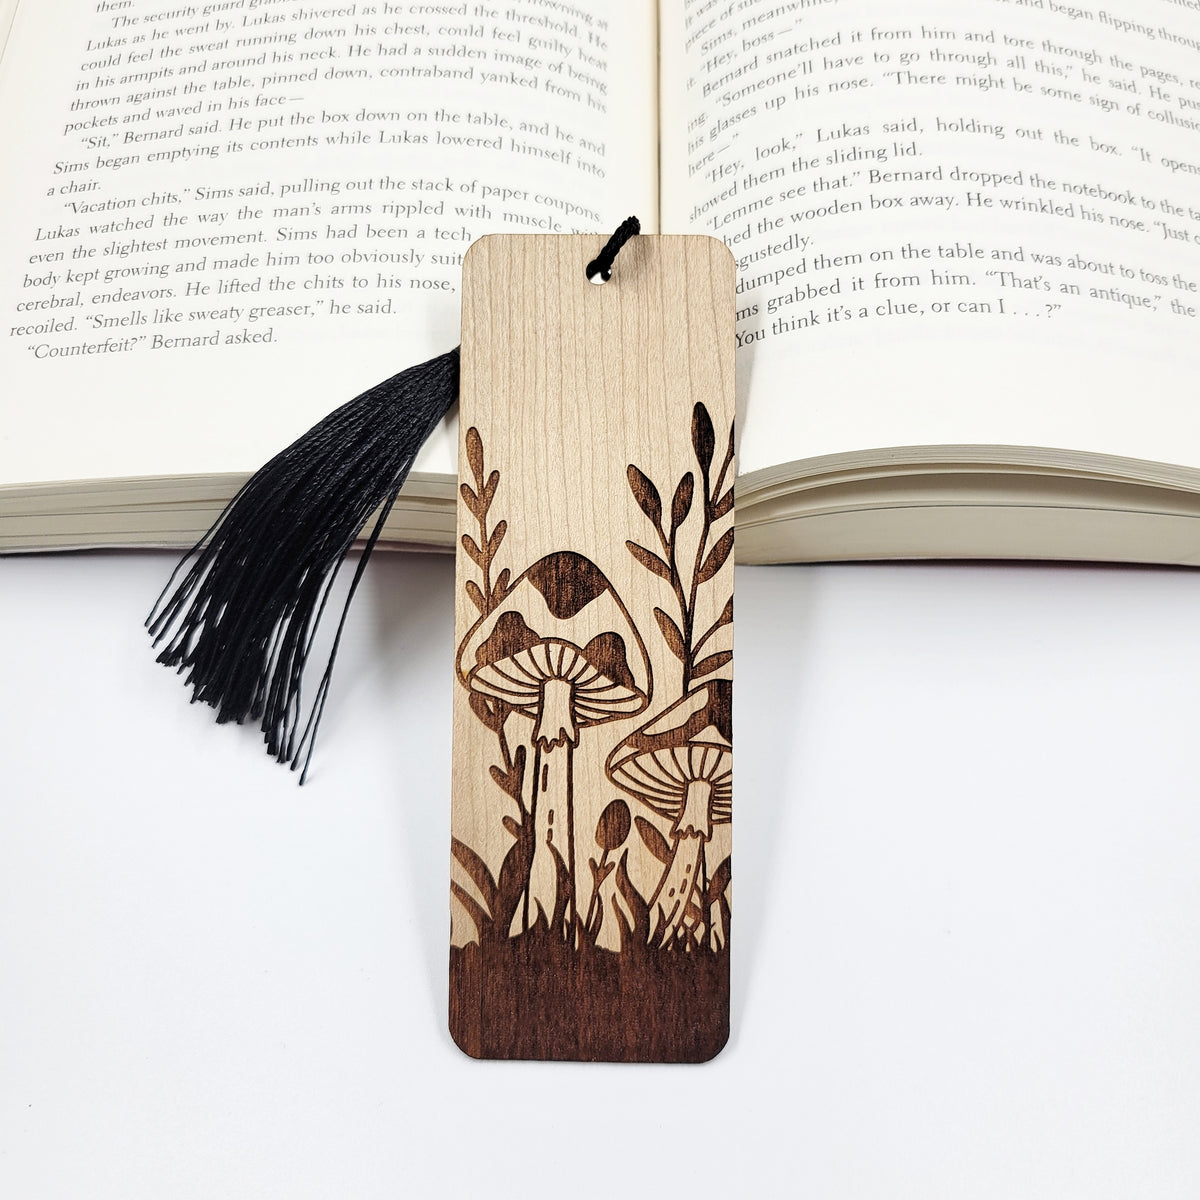 Mountain and forest wooden bookmark